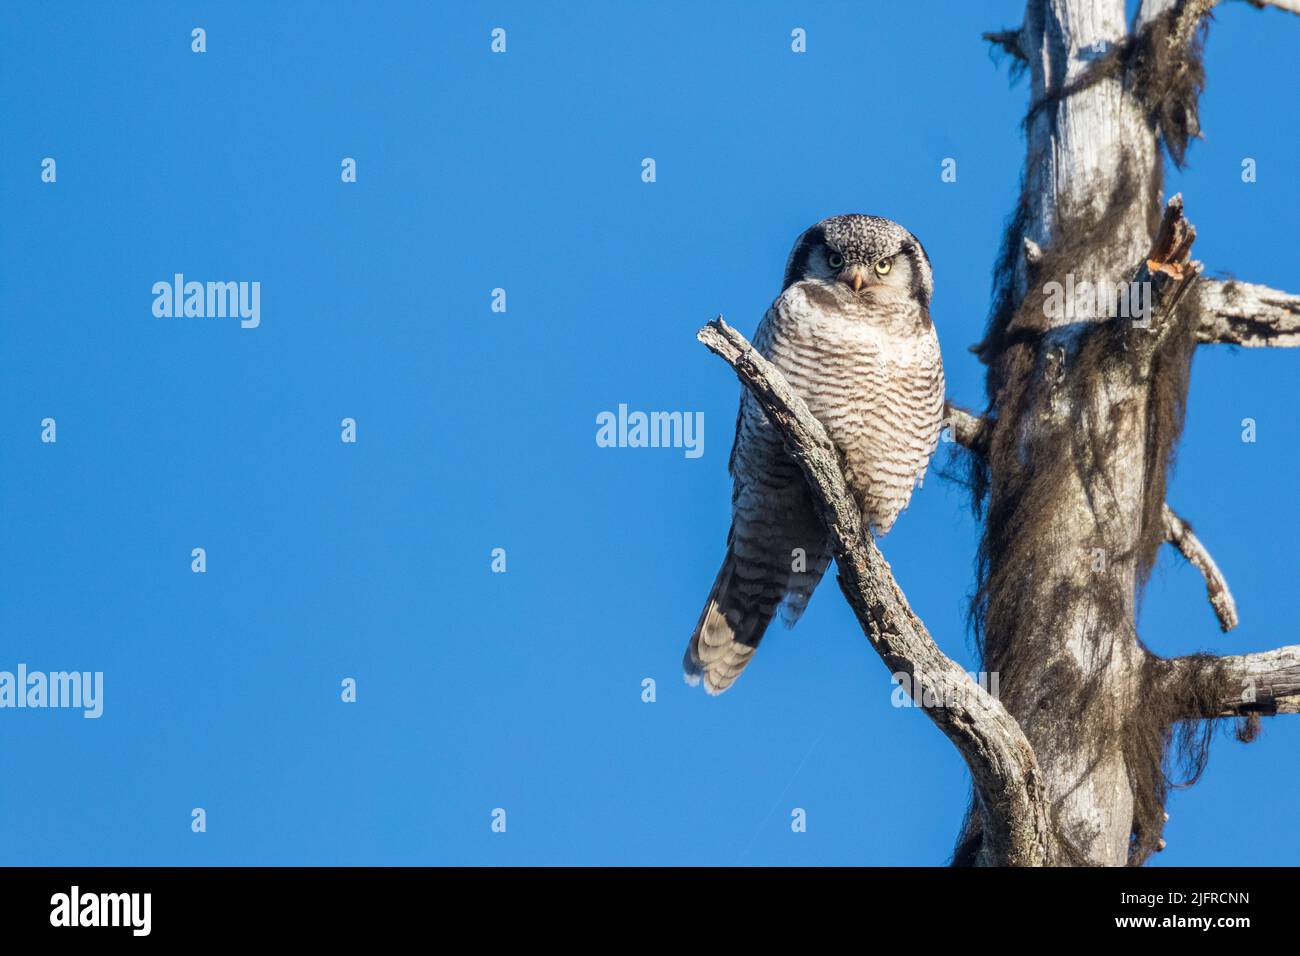 Northern hawk-owl, Surnia ulula, sitting in an old tree looking in to the camera, Gällivare county, Swedish Lapland, Sweden Stock Photo